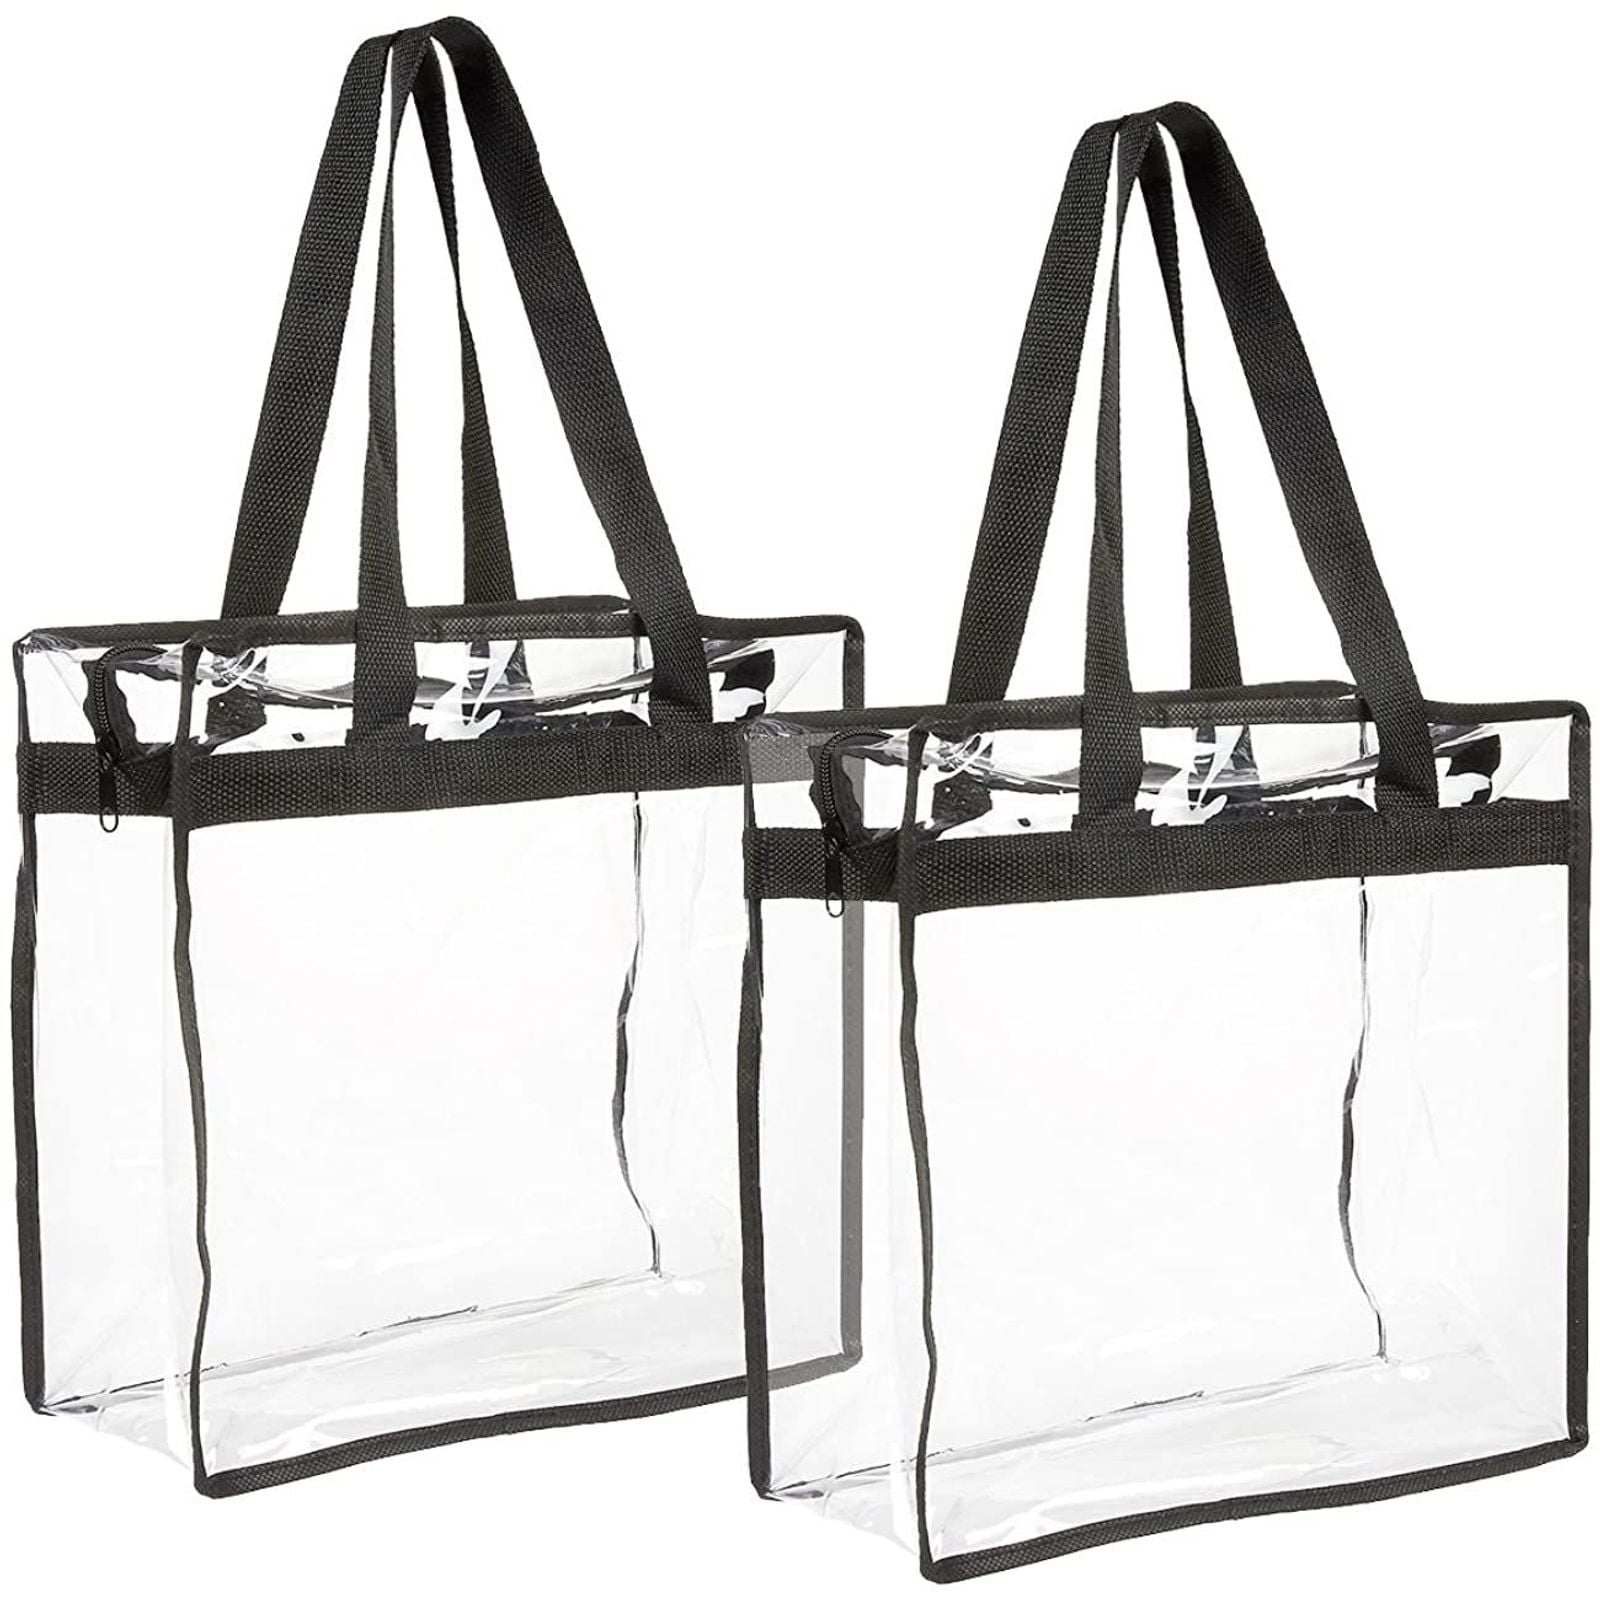 Sports Games and Concerts Transparent PVC Stadium Security Bag for Work School Clear Tote bag 12x12x6 Stadium Approved 